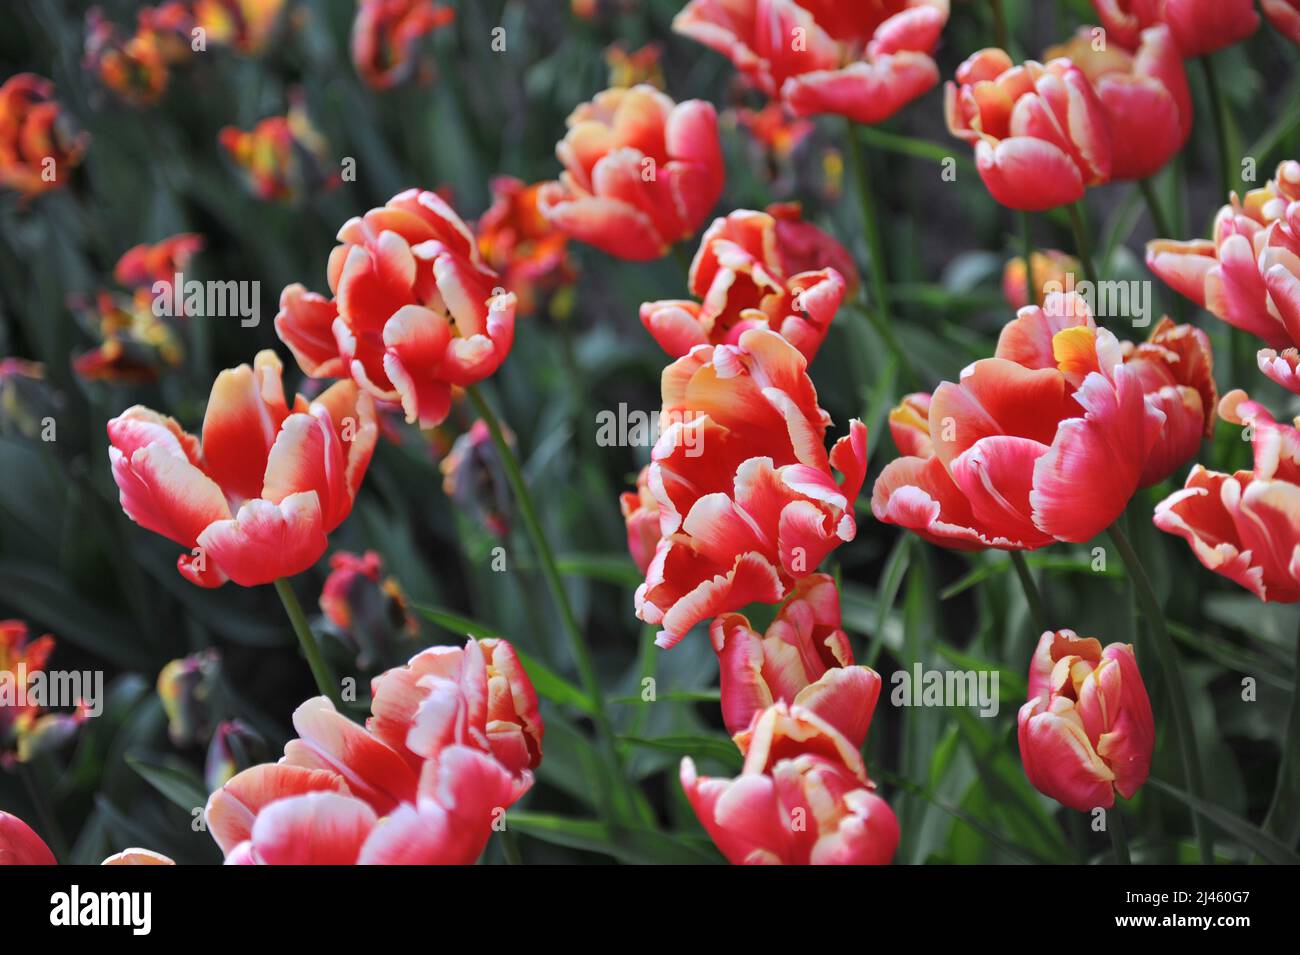 Red and white tulips (Tulipa) Dee Jay Parrot bloom in a garden in March Stock Photo